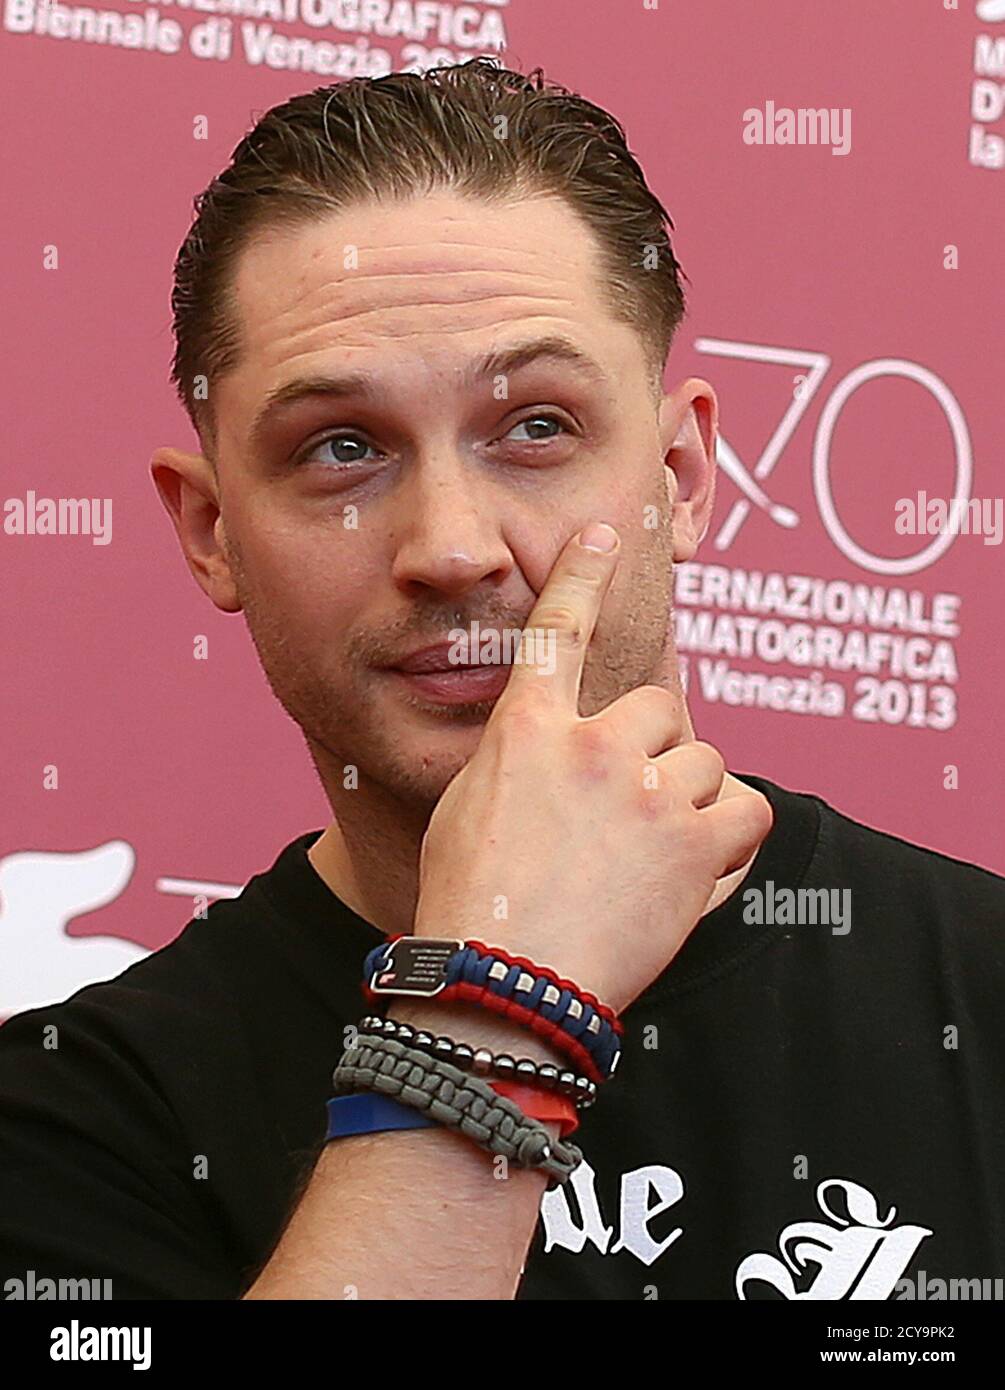 Cast Member Tom Hardy Scratches His Face During A Photocall For The Movie  "Locke", Directed By Steven Knight, During The 70th Venice Film Festival In  Venice September 2, REUTERS/Alessandro Bianchi (ITALY